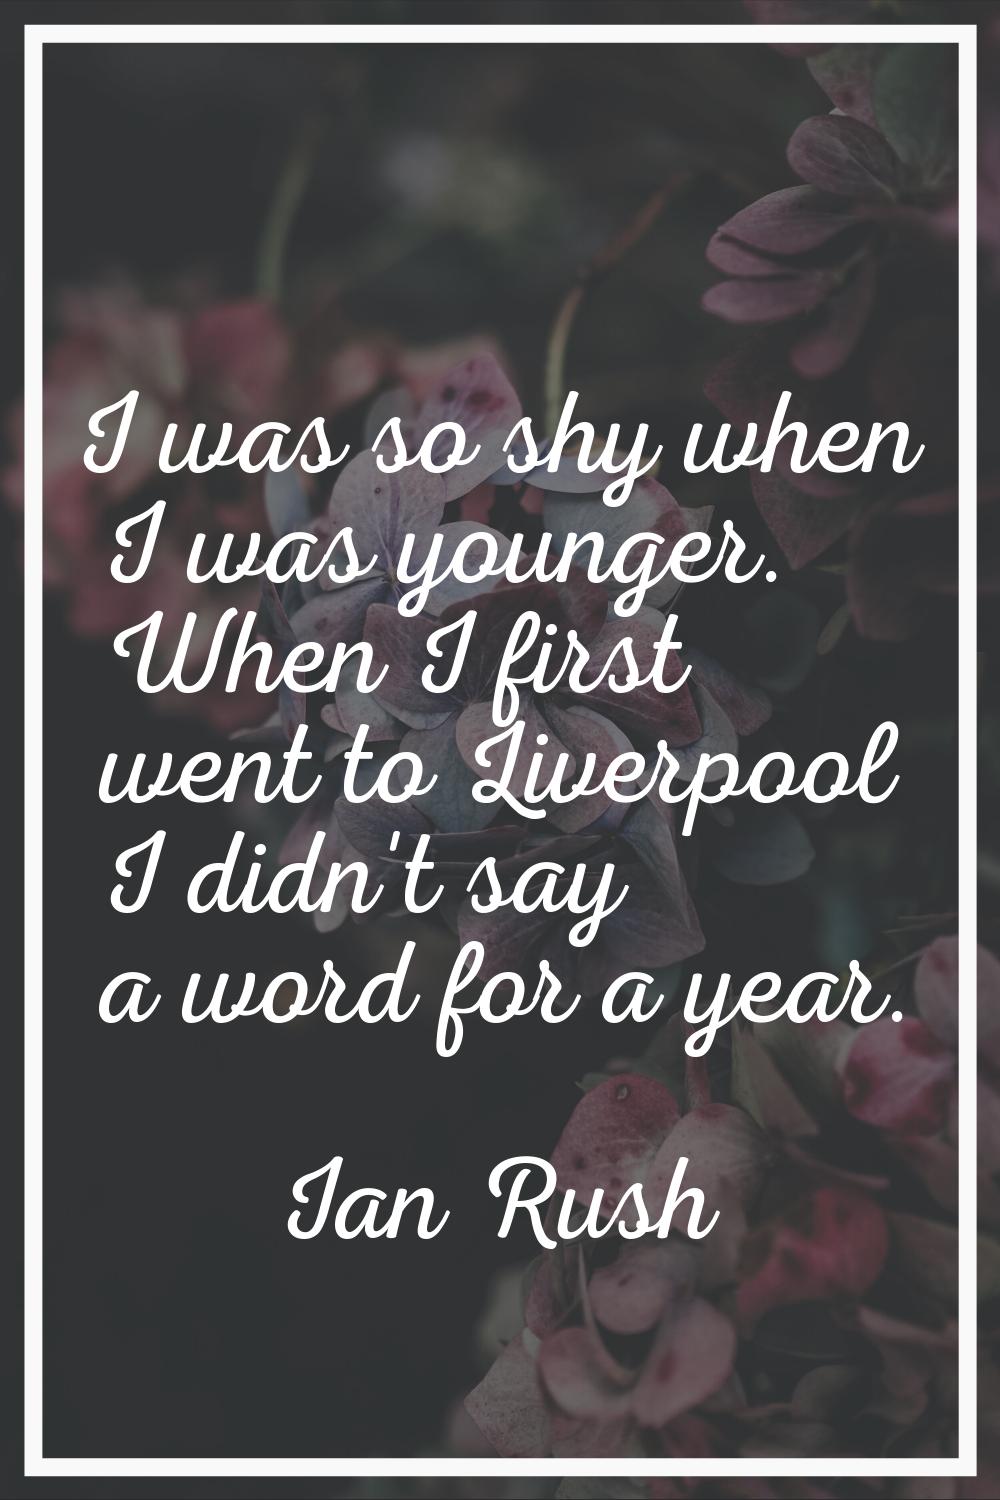 I was so shy when I was younger. When I first went to Liverpool I didn't say a word for a year.